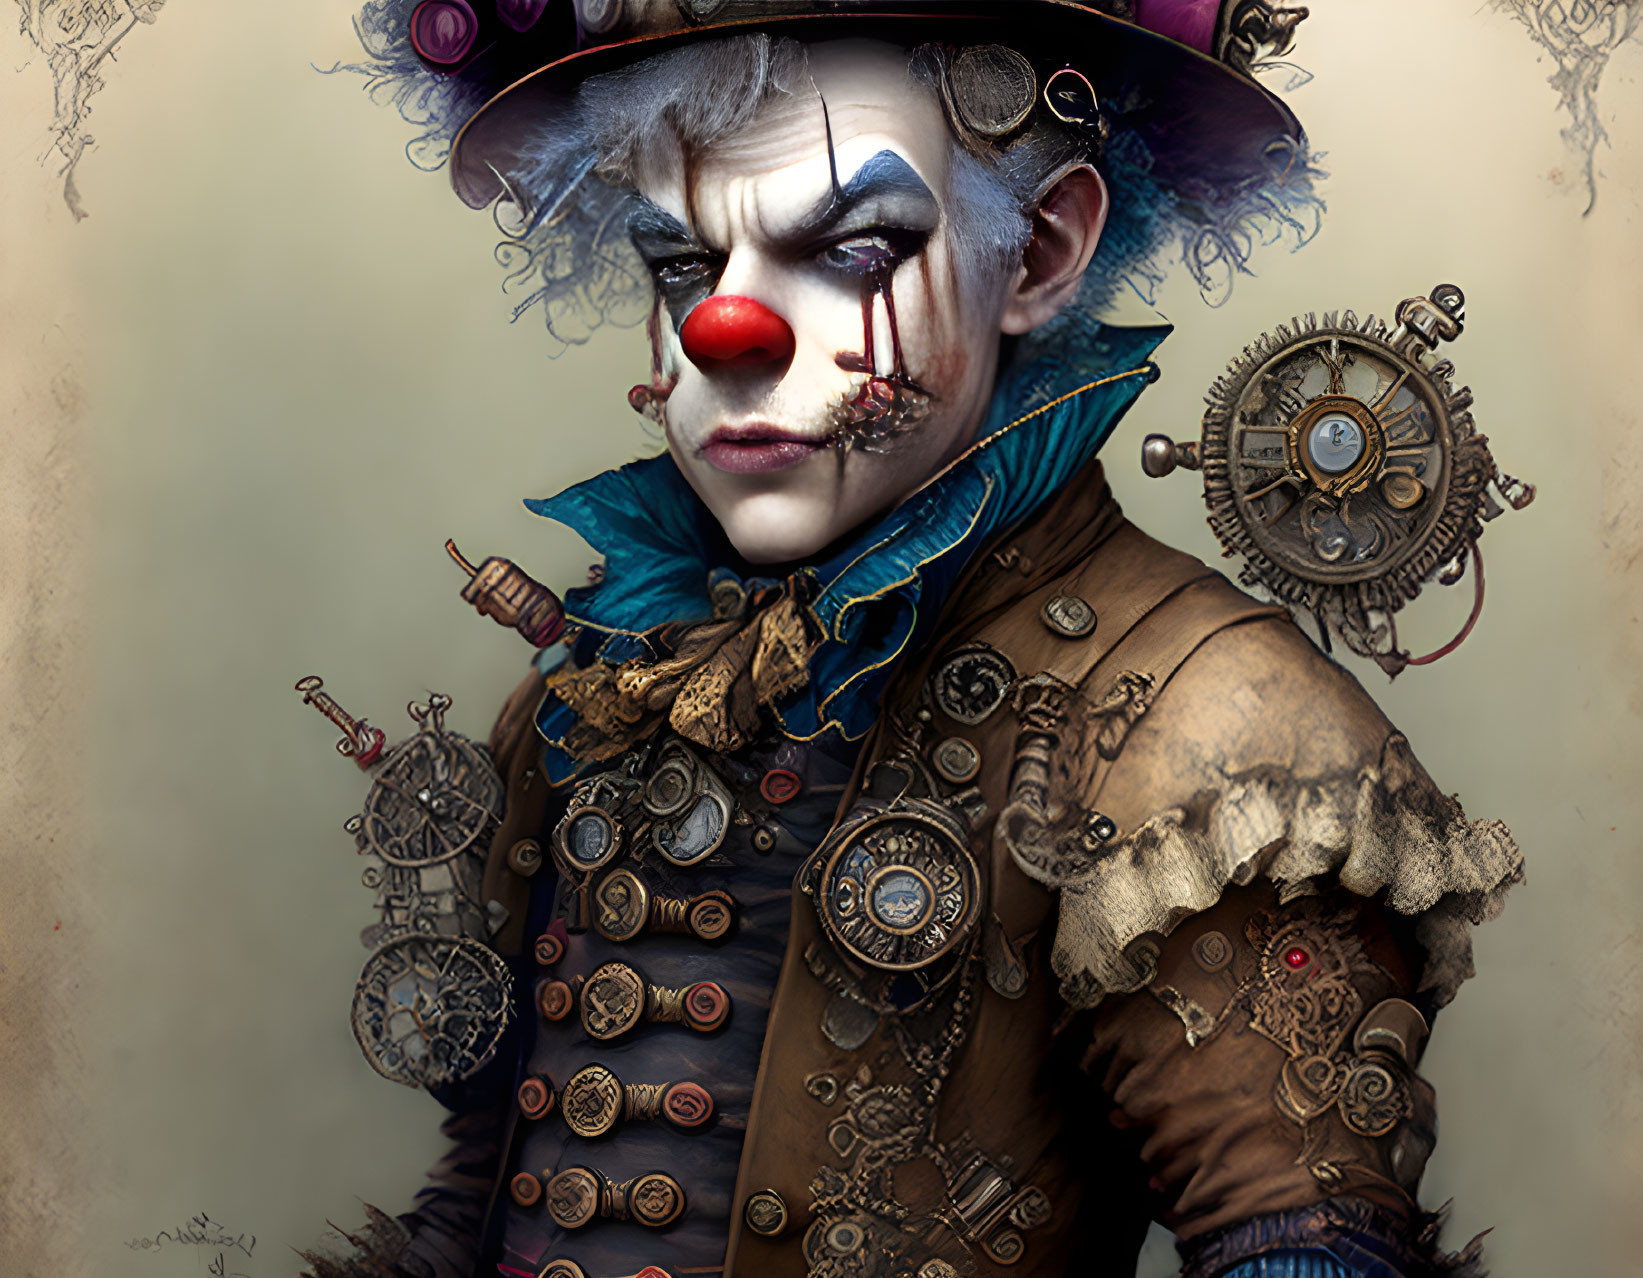 Steampunk-inspired clown with mechanical arm and gear-adorned top hat